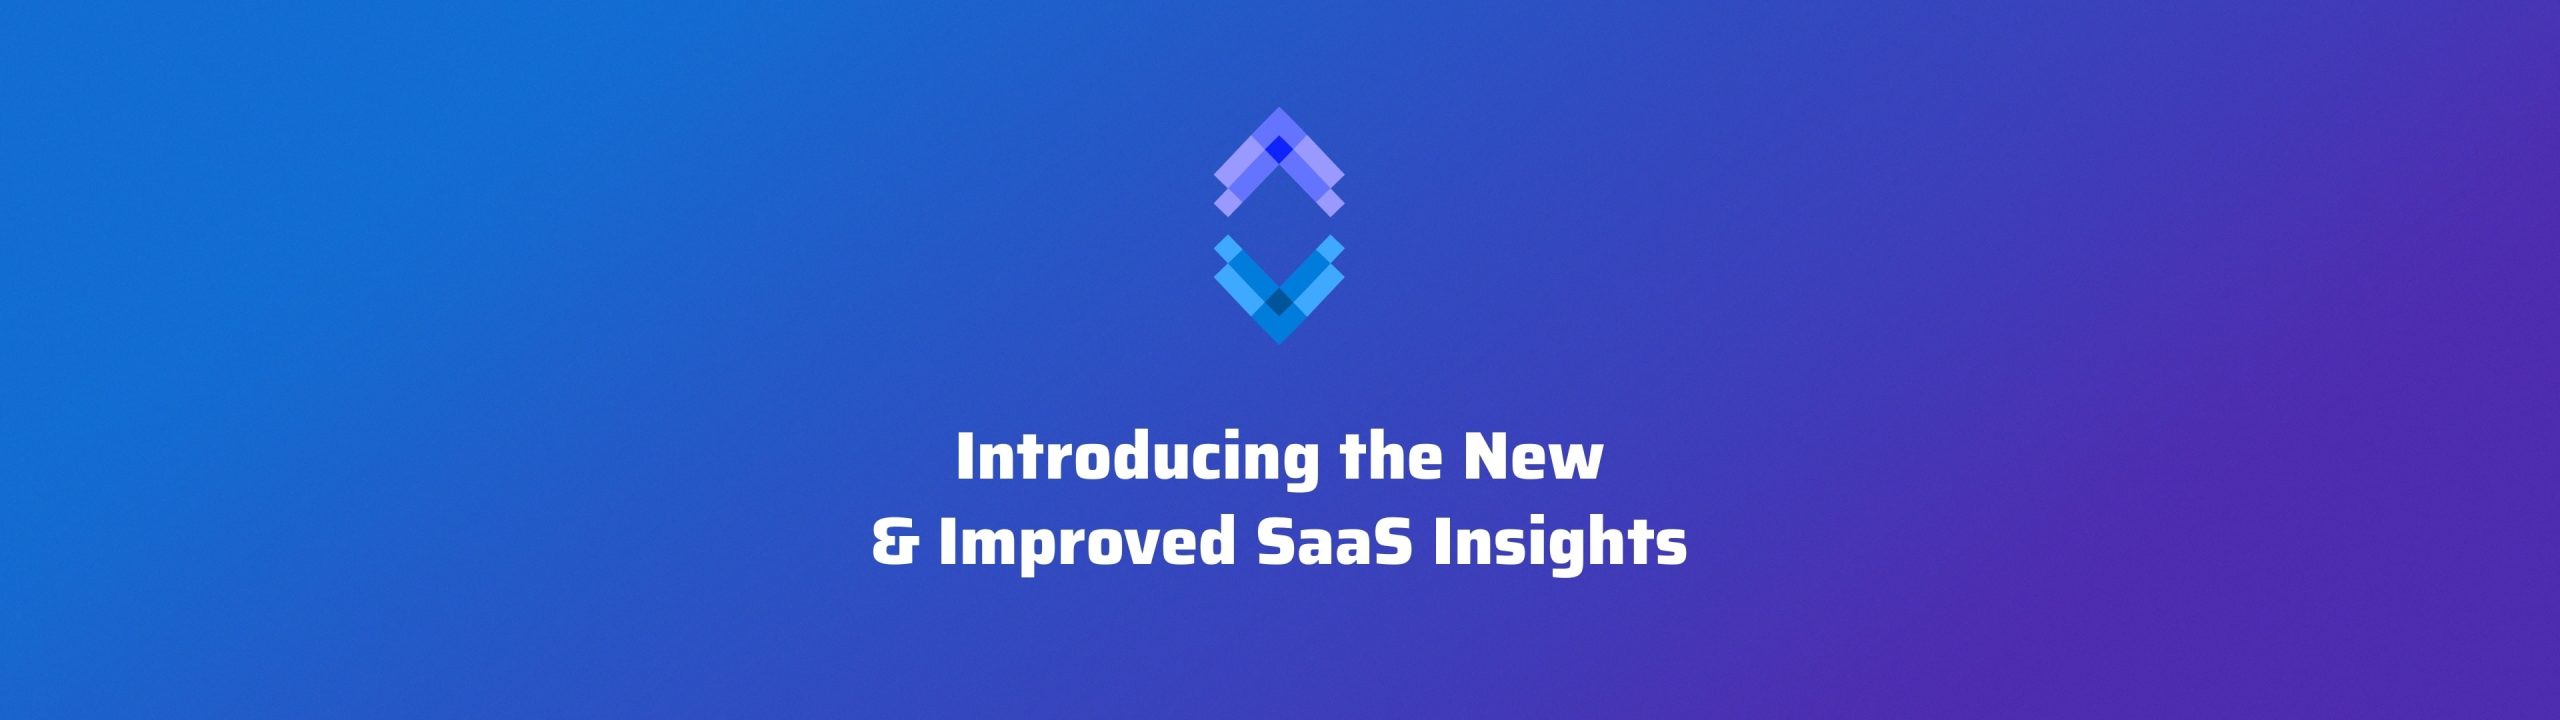 introducing the new saas insights